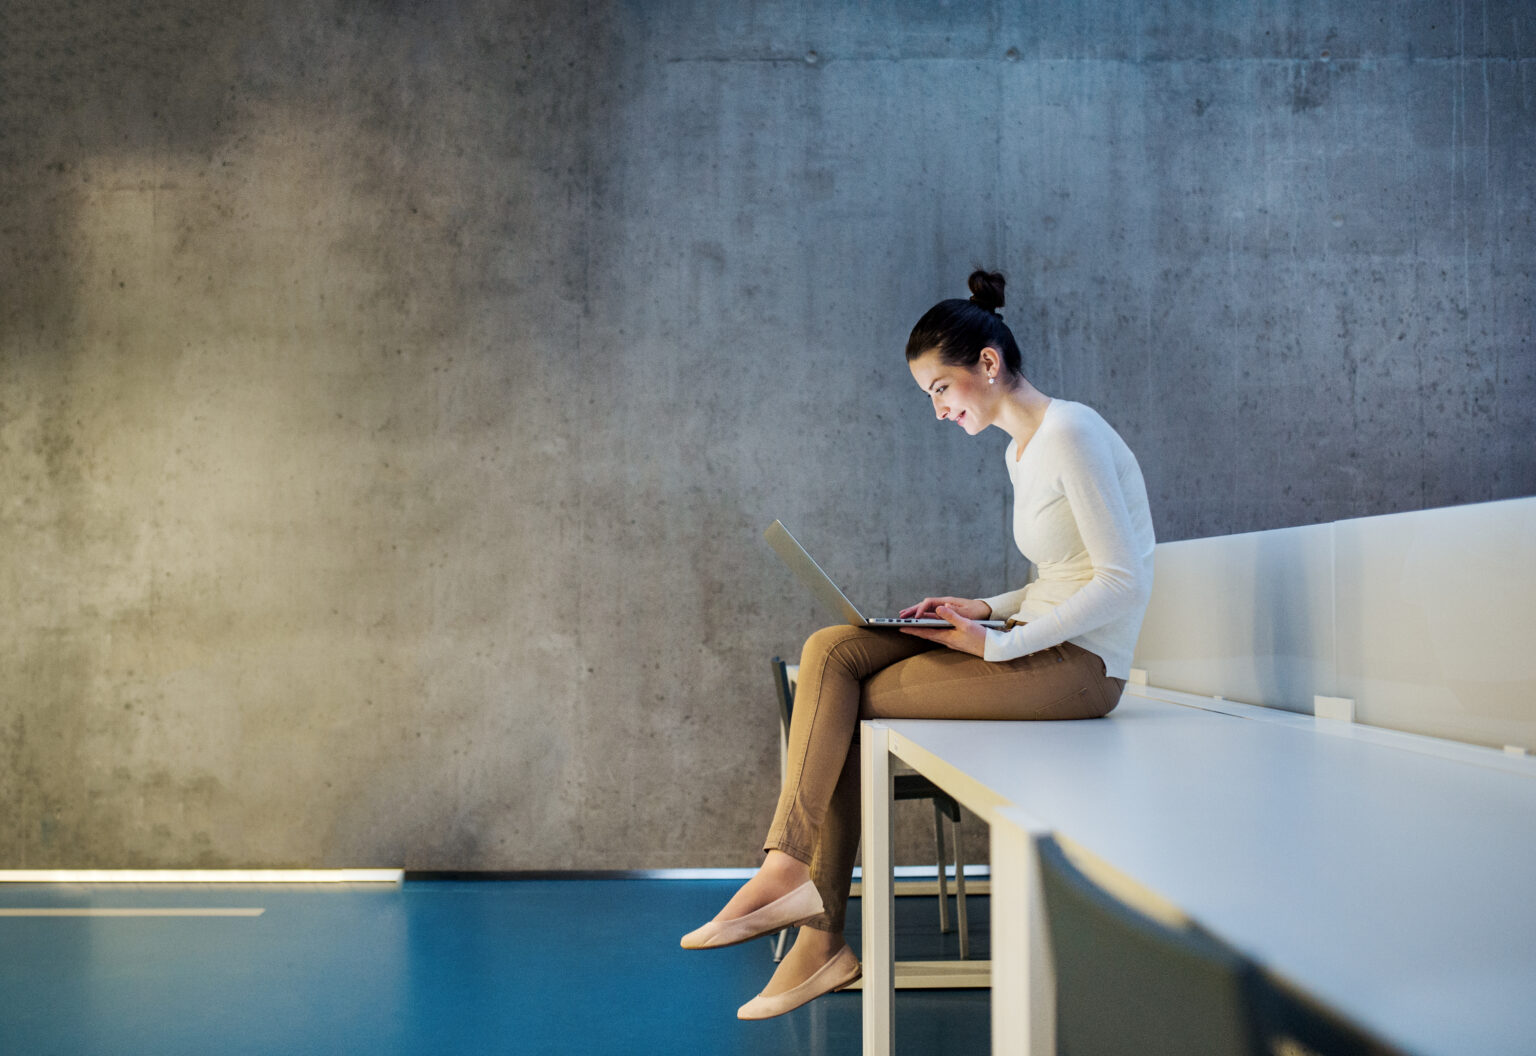 Seated woman on a computer with concrete wall in the background.